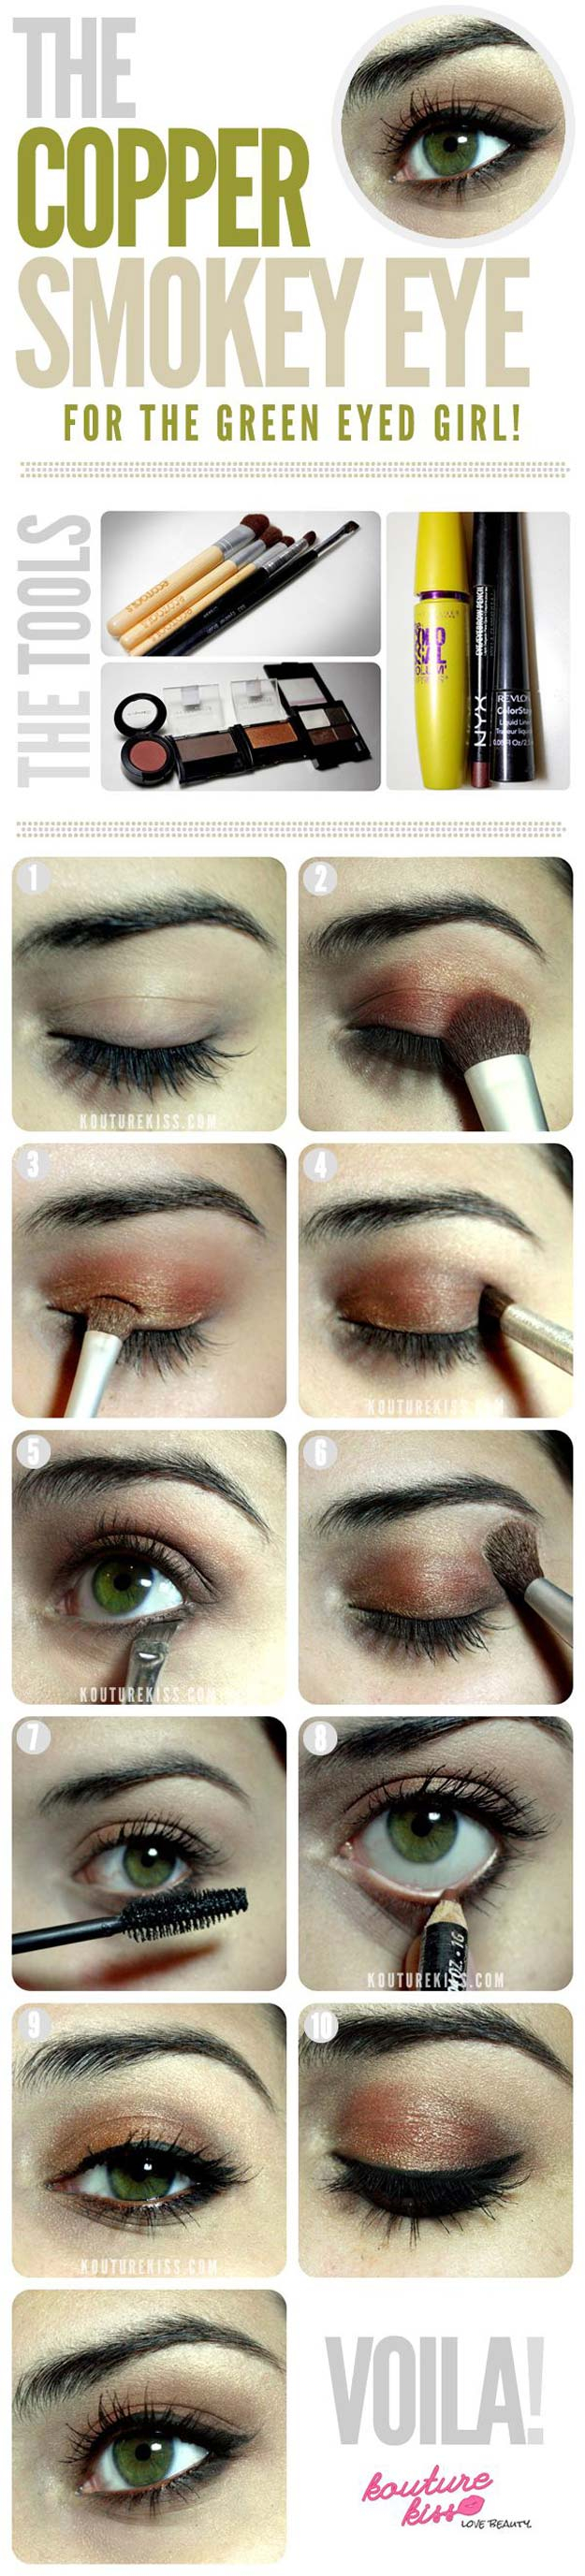 Prom Makeup Eyes 38 Makeup Ideas For Prom The Goddess